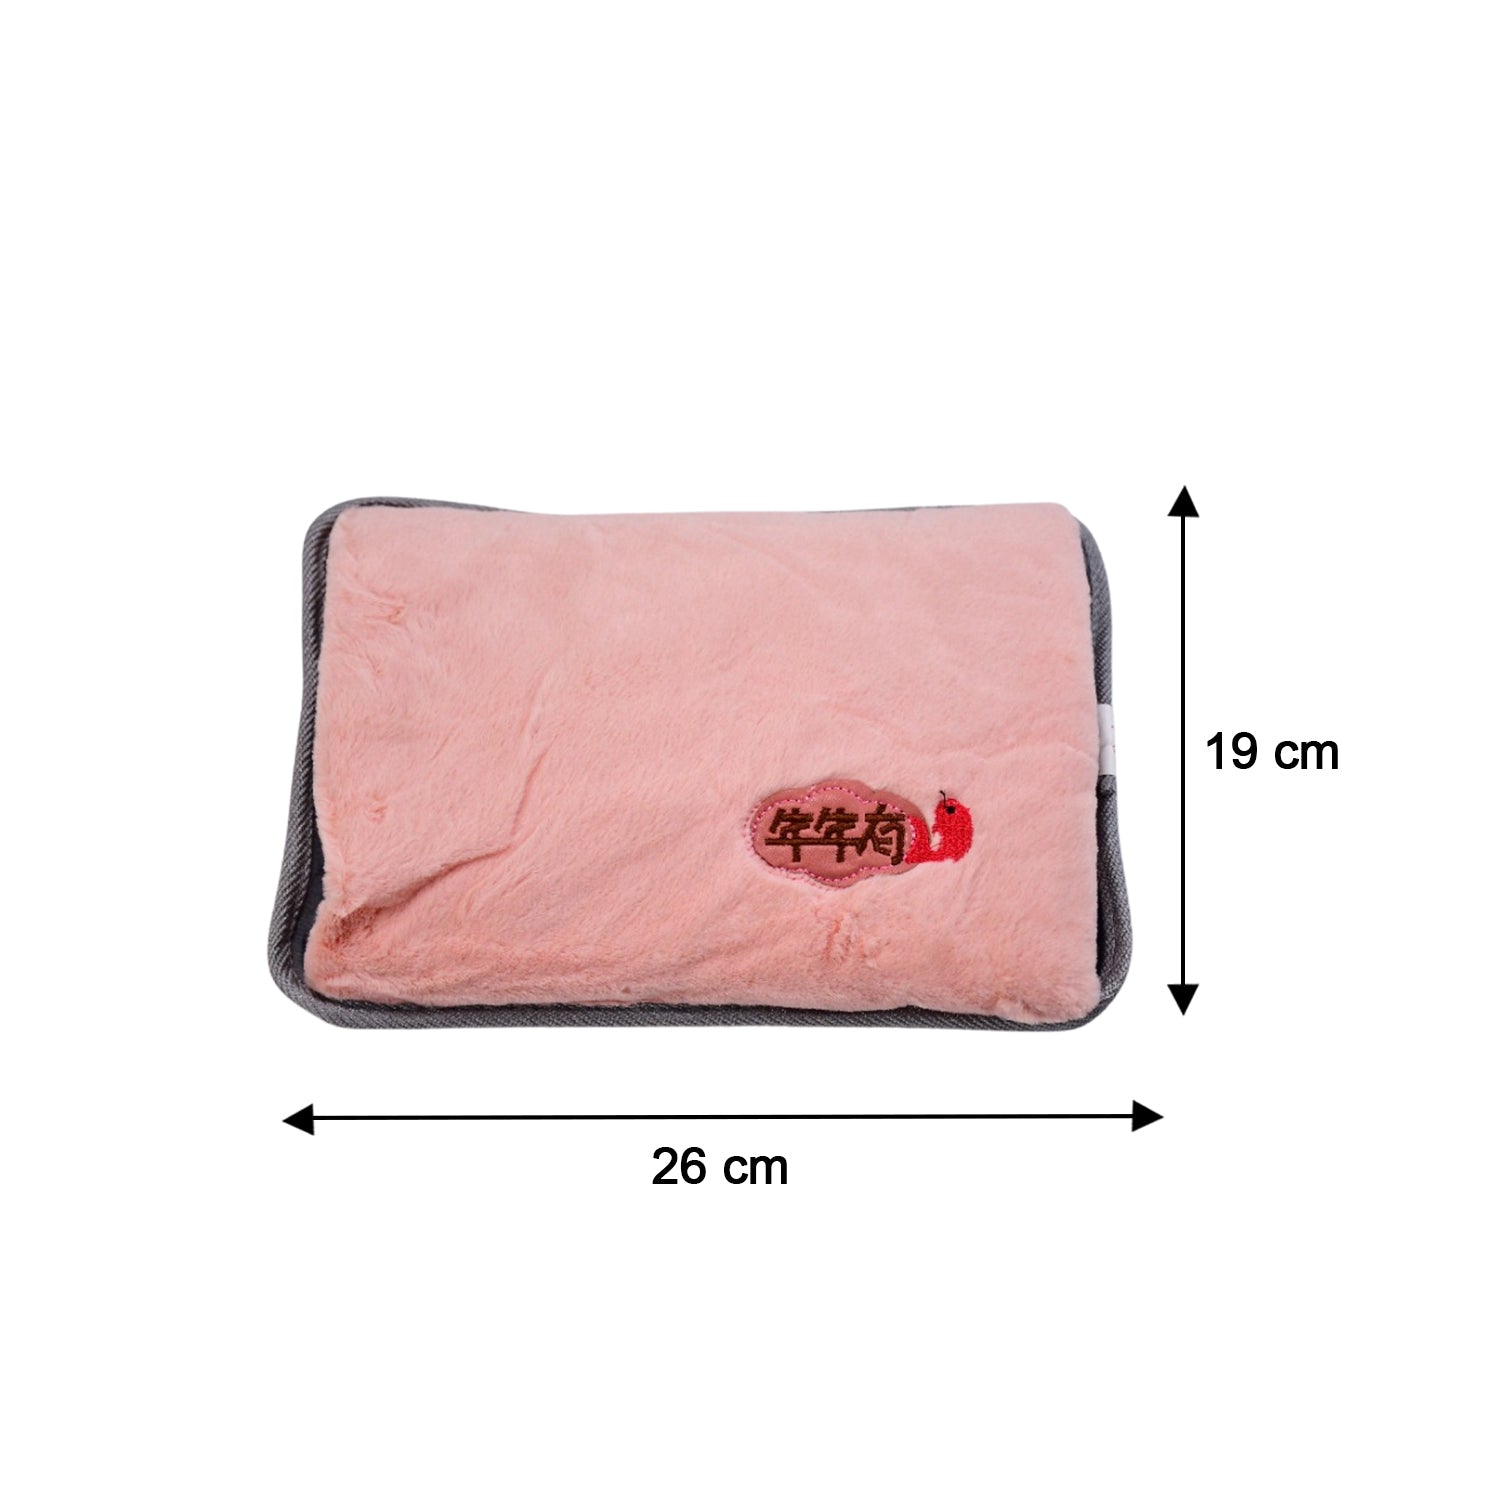 WITERY Electric Hot Water Bag with Soft Cover- Rechargeable Heating Pad Hot  Water Bottle for Pain Relief, Cramps & Sore Muscles, Hot Compress Bag Hand